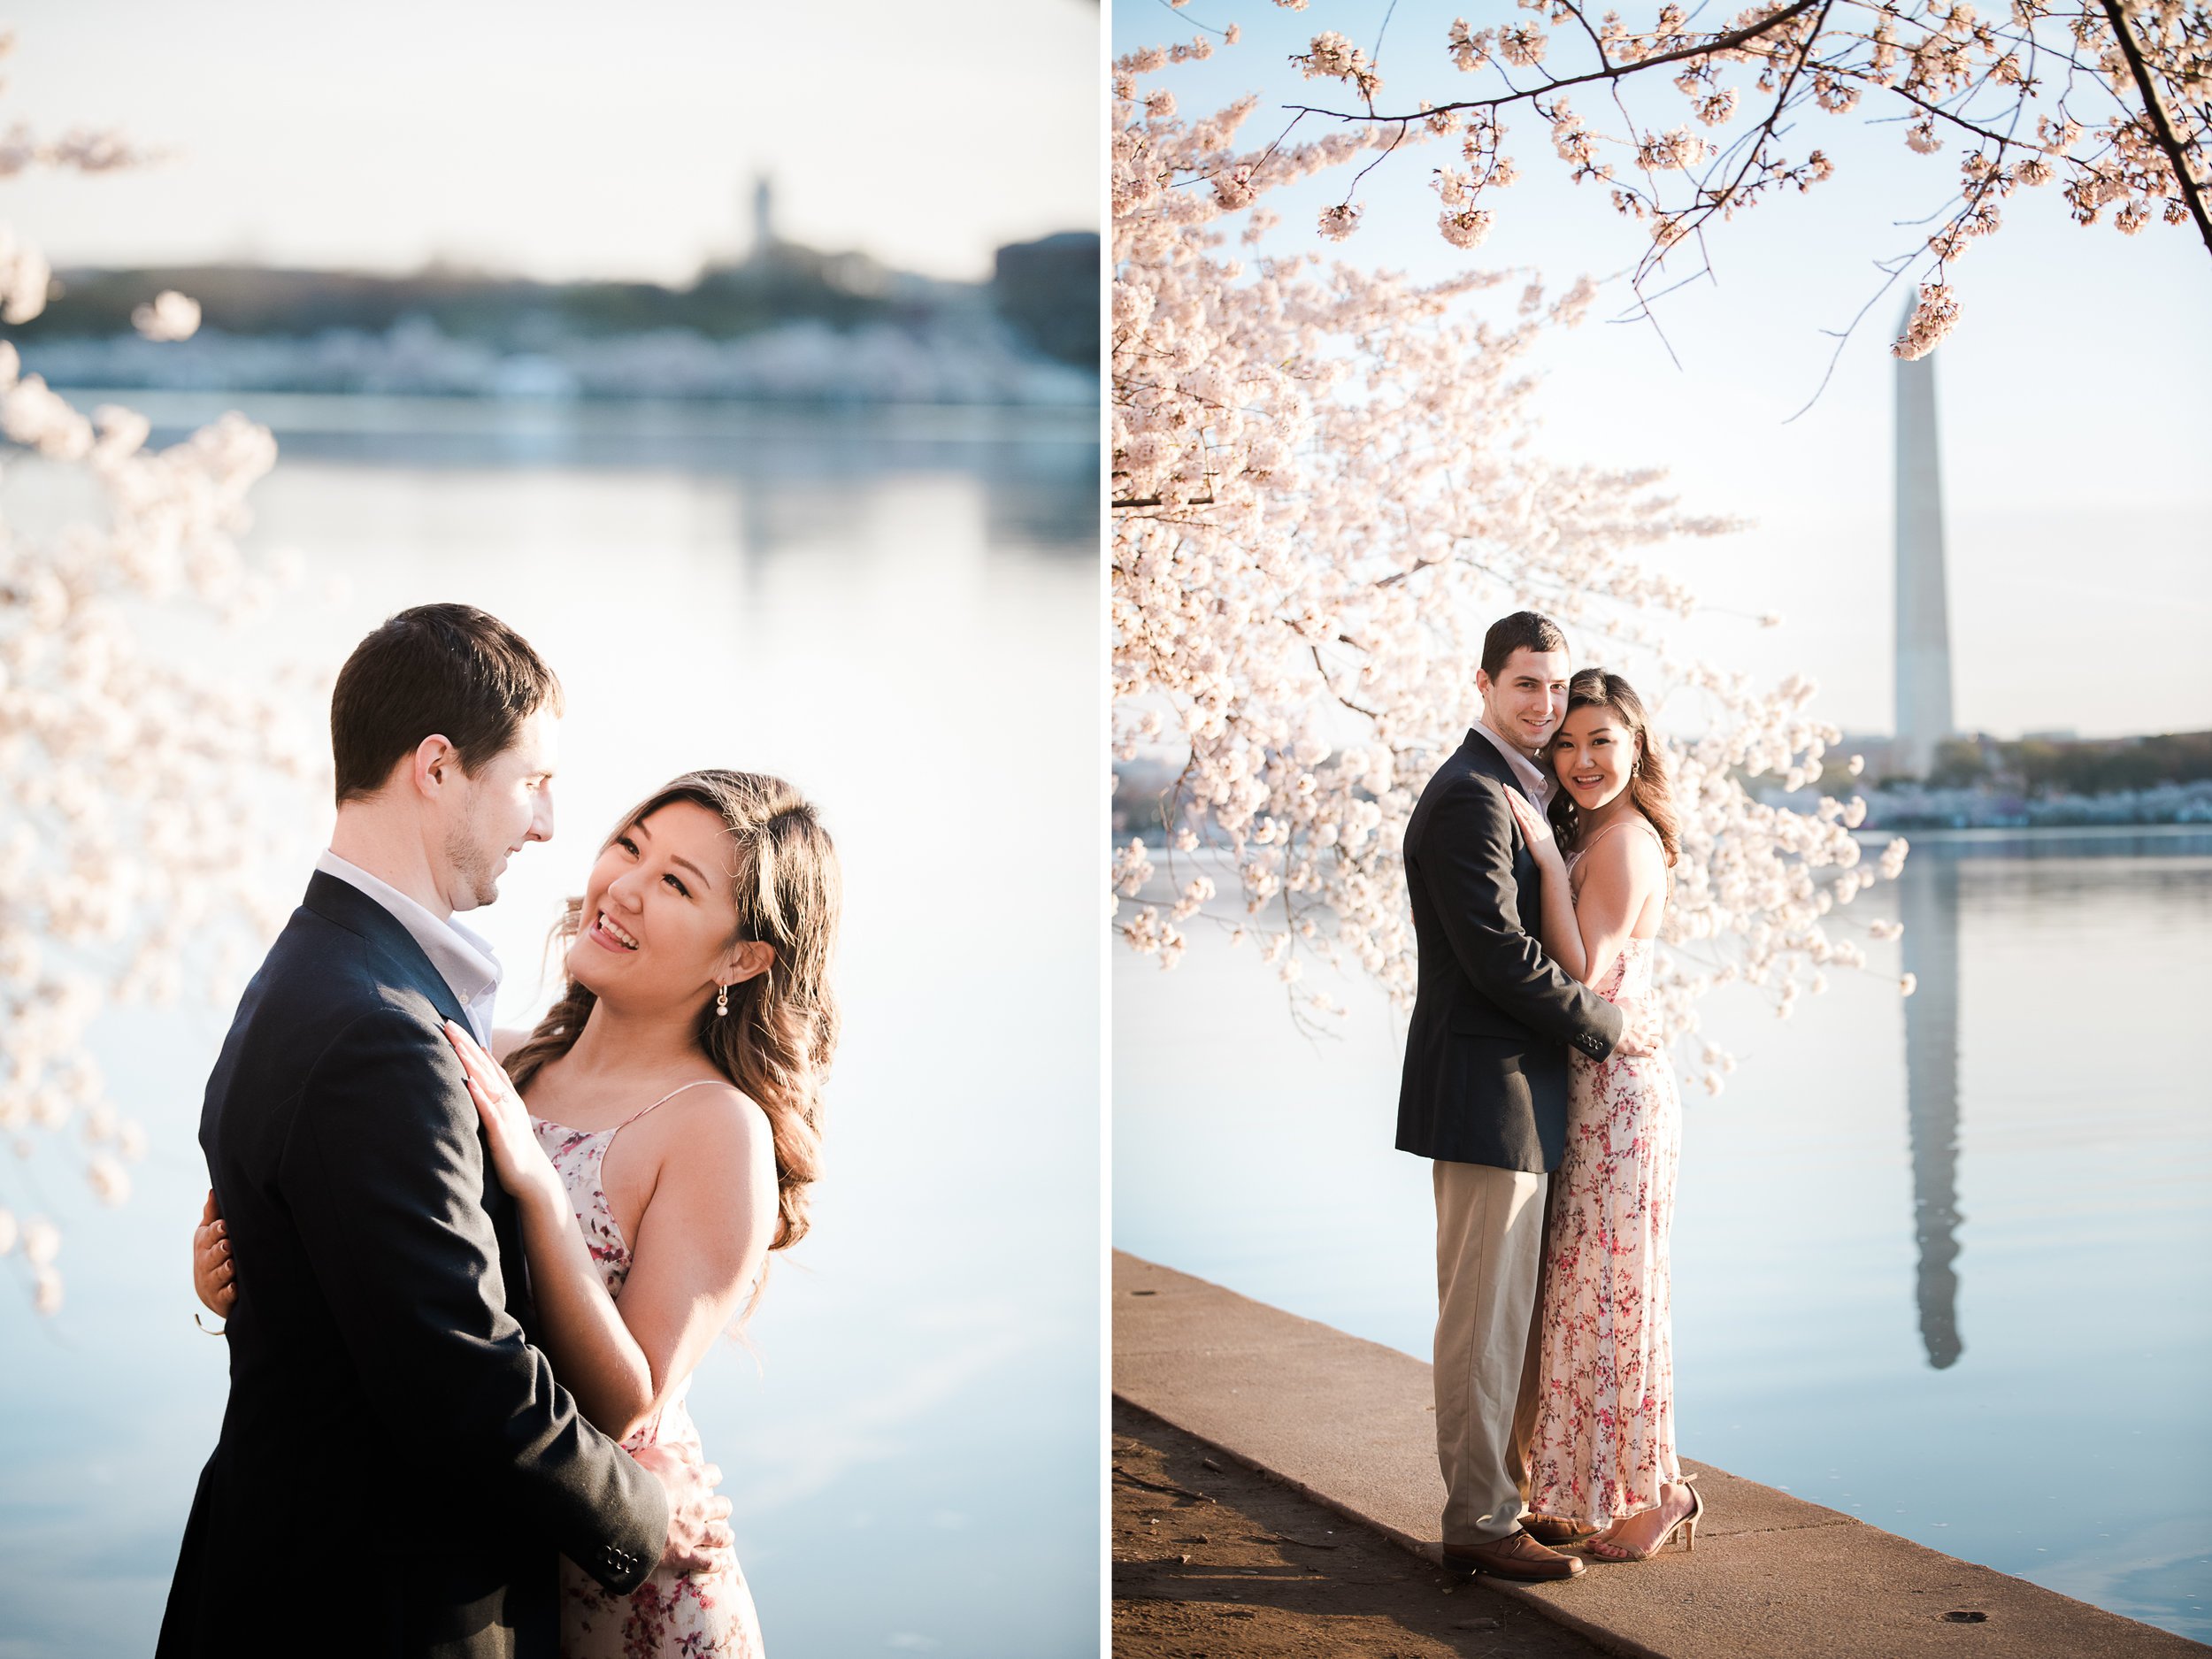 Couple photo shoot at cherry blossoms in DC